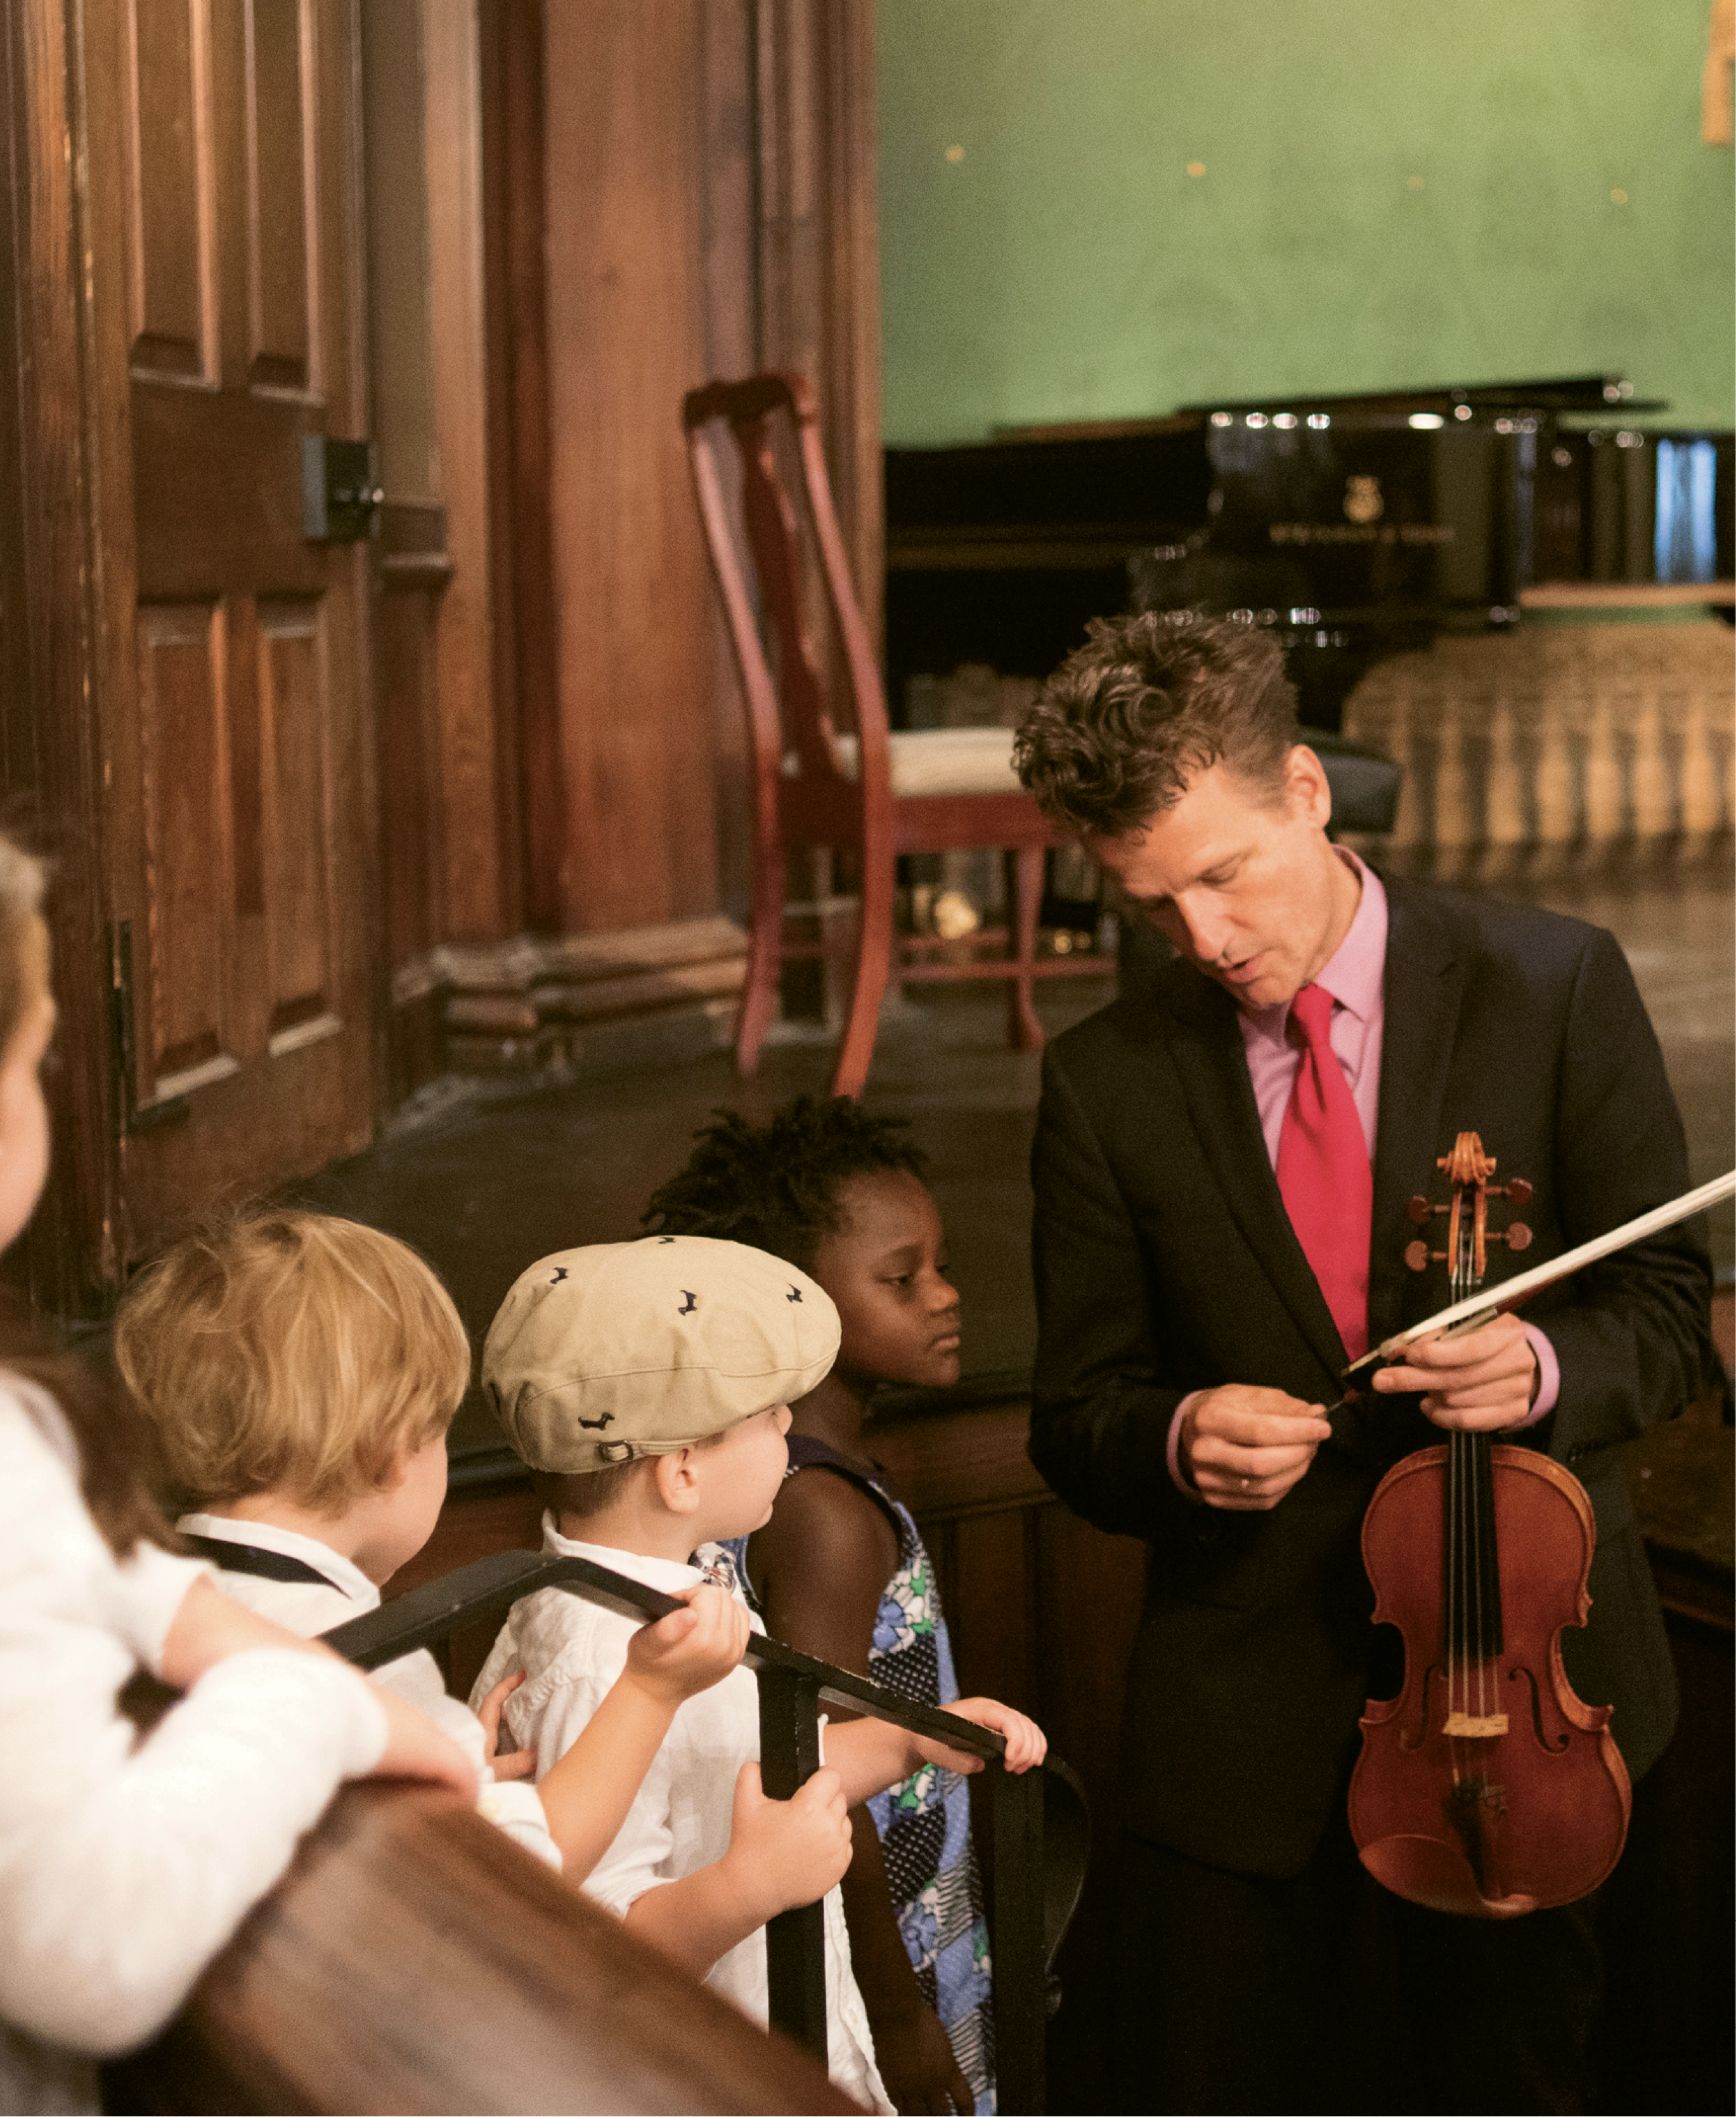 Child’s Play: Every festival season, Nuttall spends about six hours with local kids for outreach programs. Here, some children get a close look at Nuttall’s violin and bow after a special concert for individuals with autism and their families.